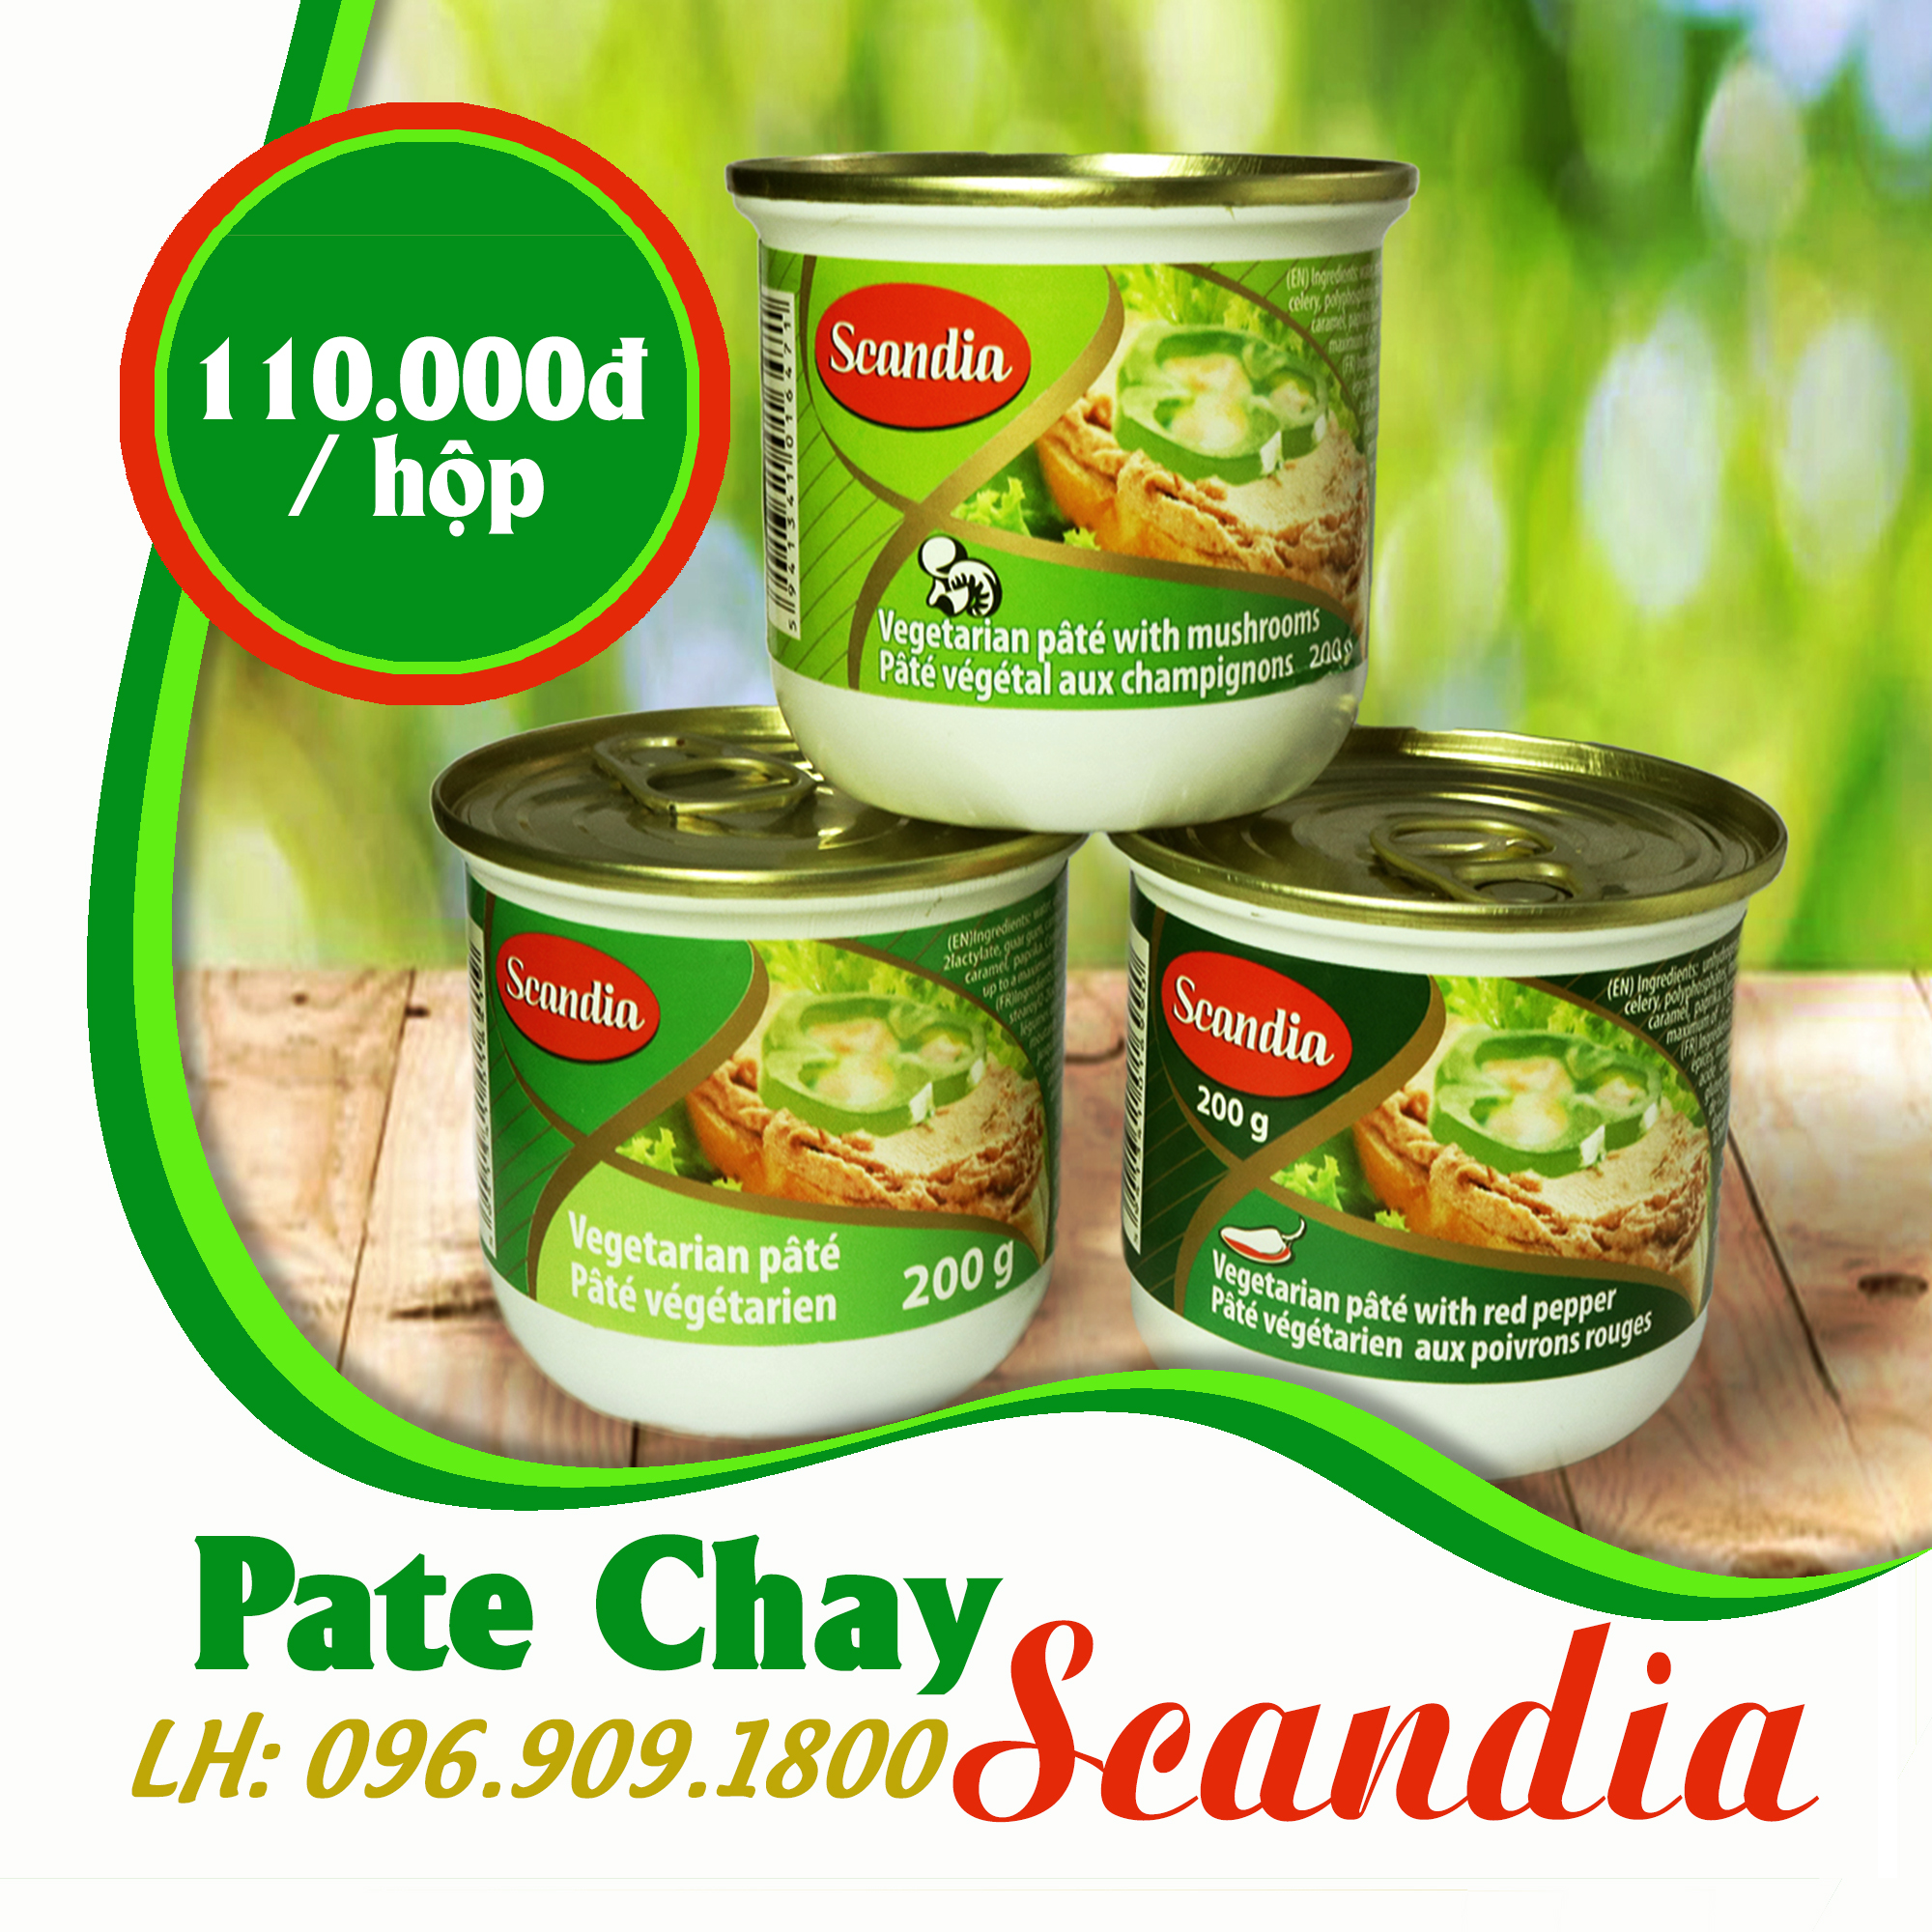 pate chay